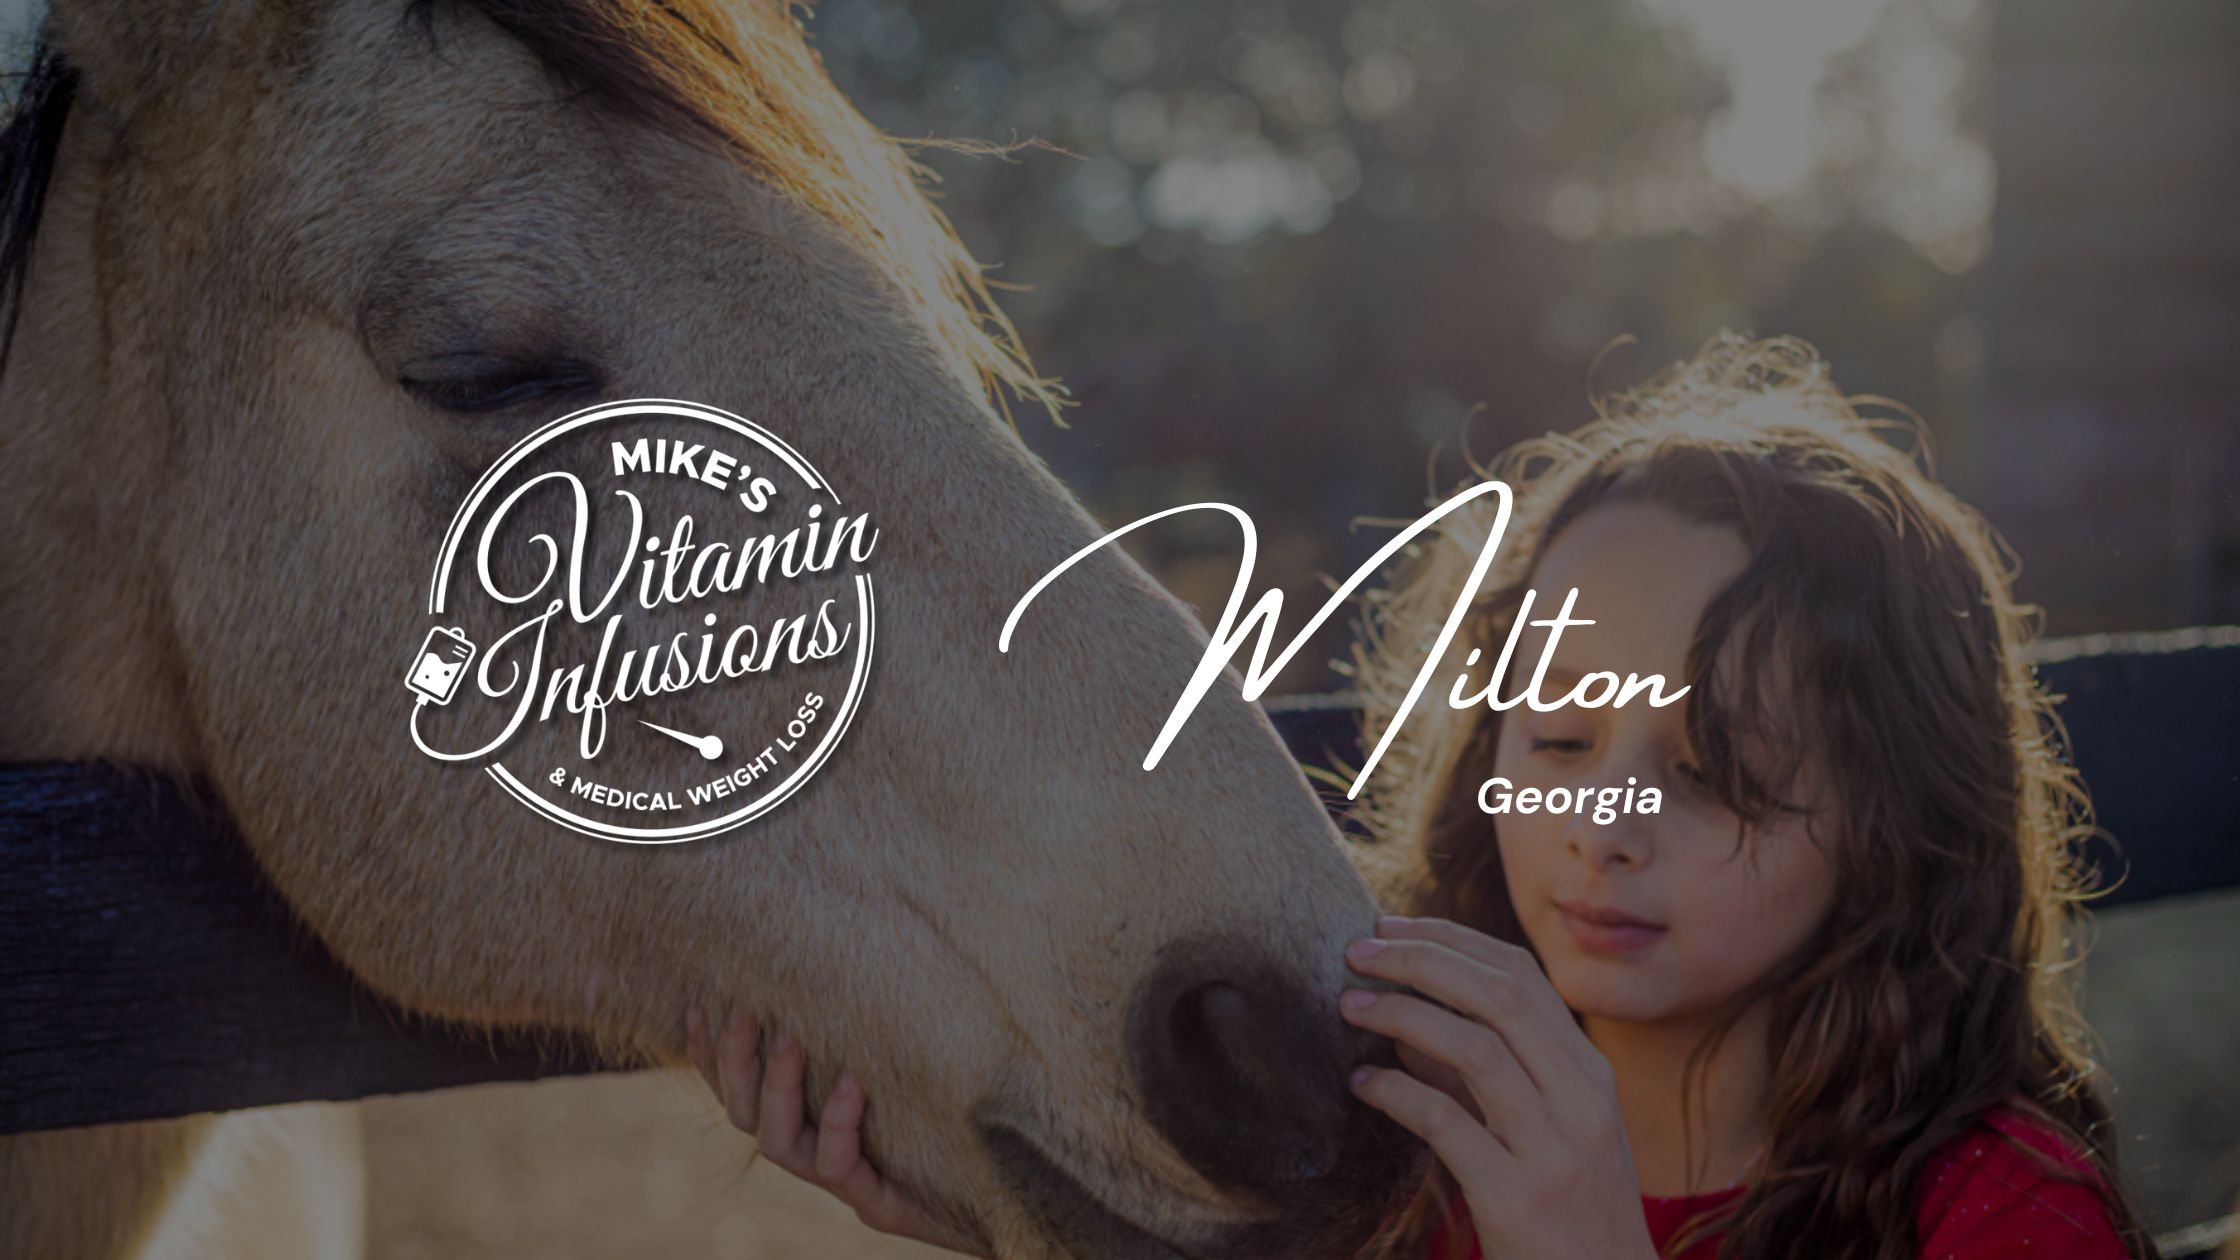 Image of a horse and a girl in Milton Georgia with the mike's vitamin infusions logo